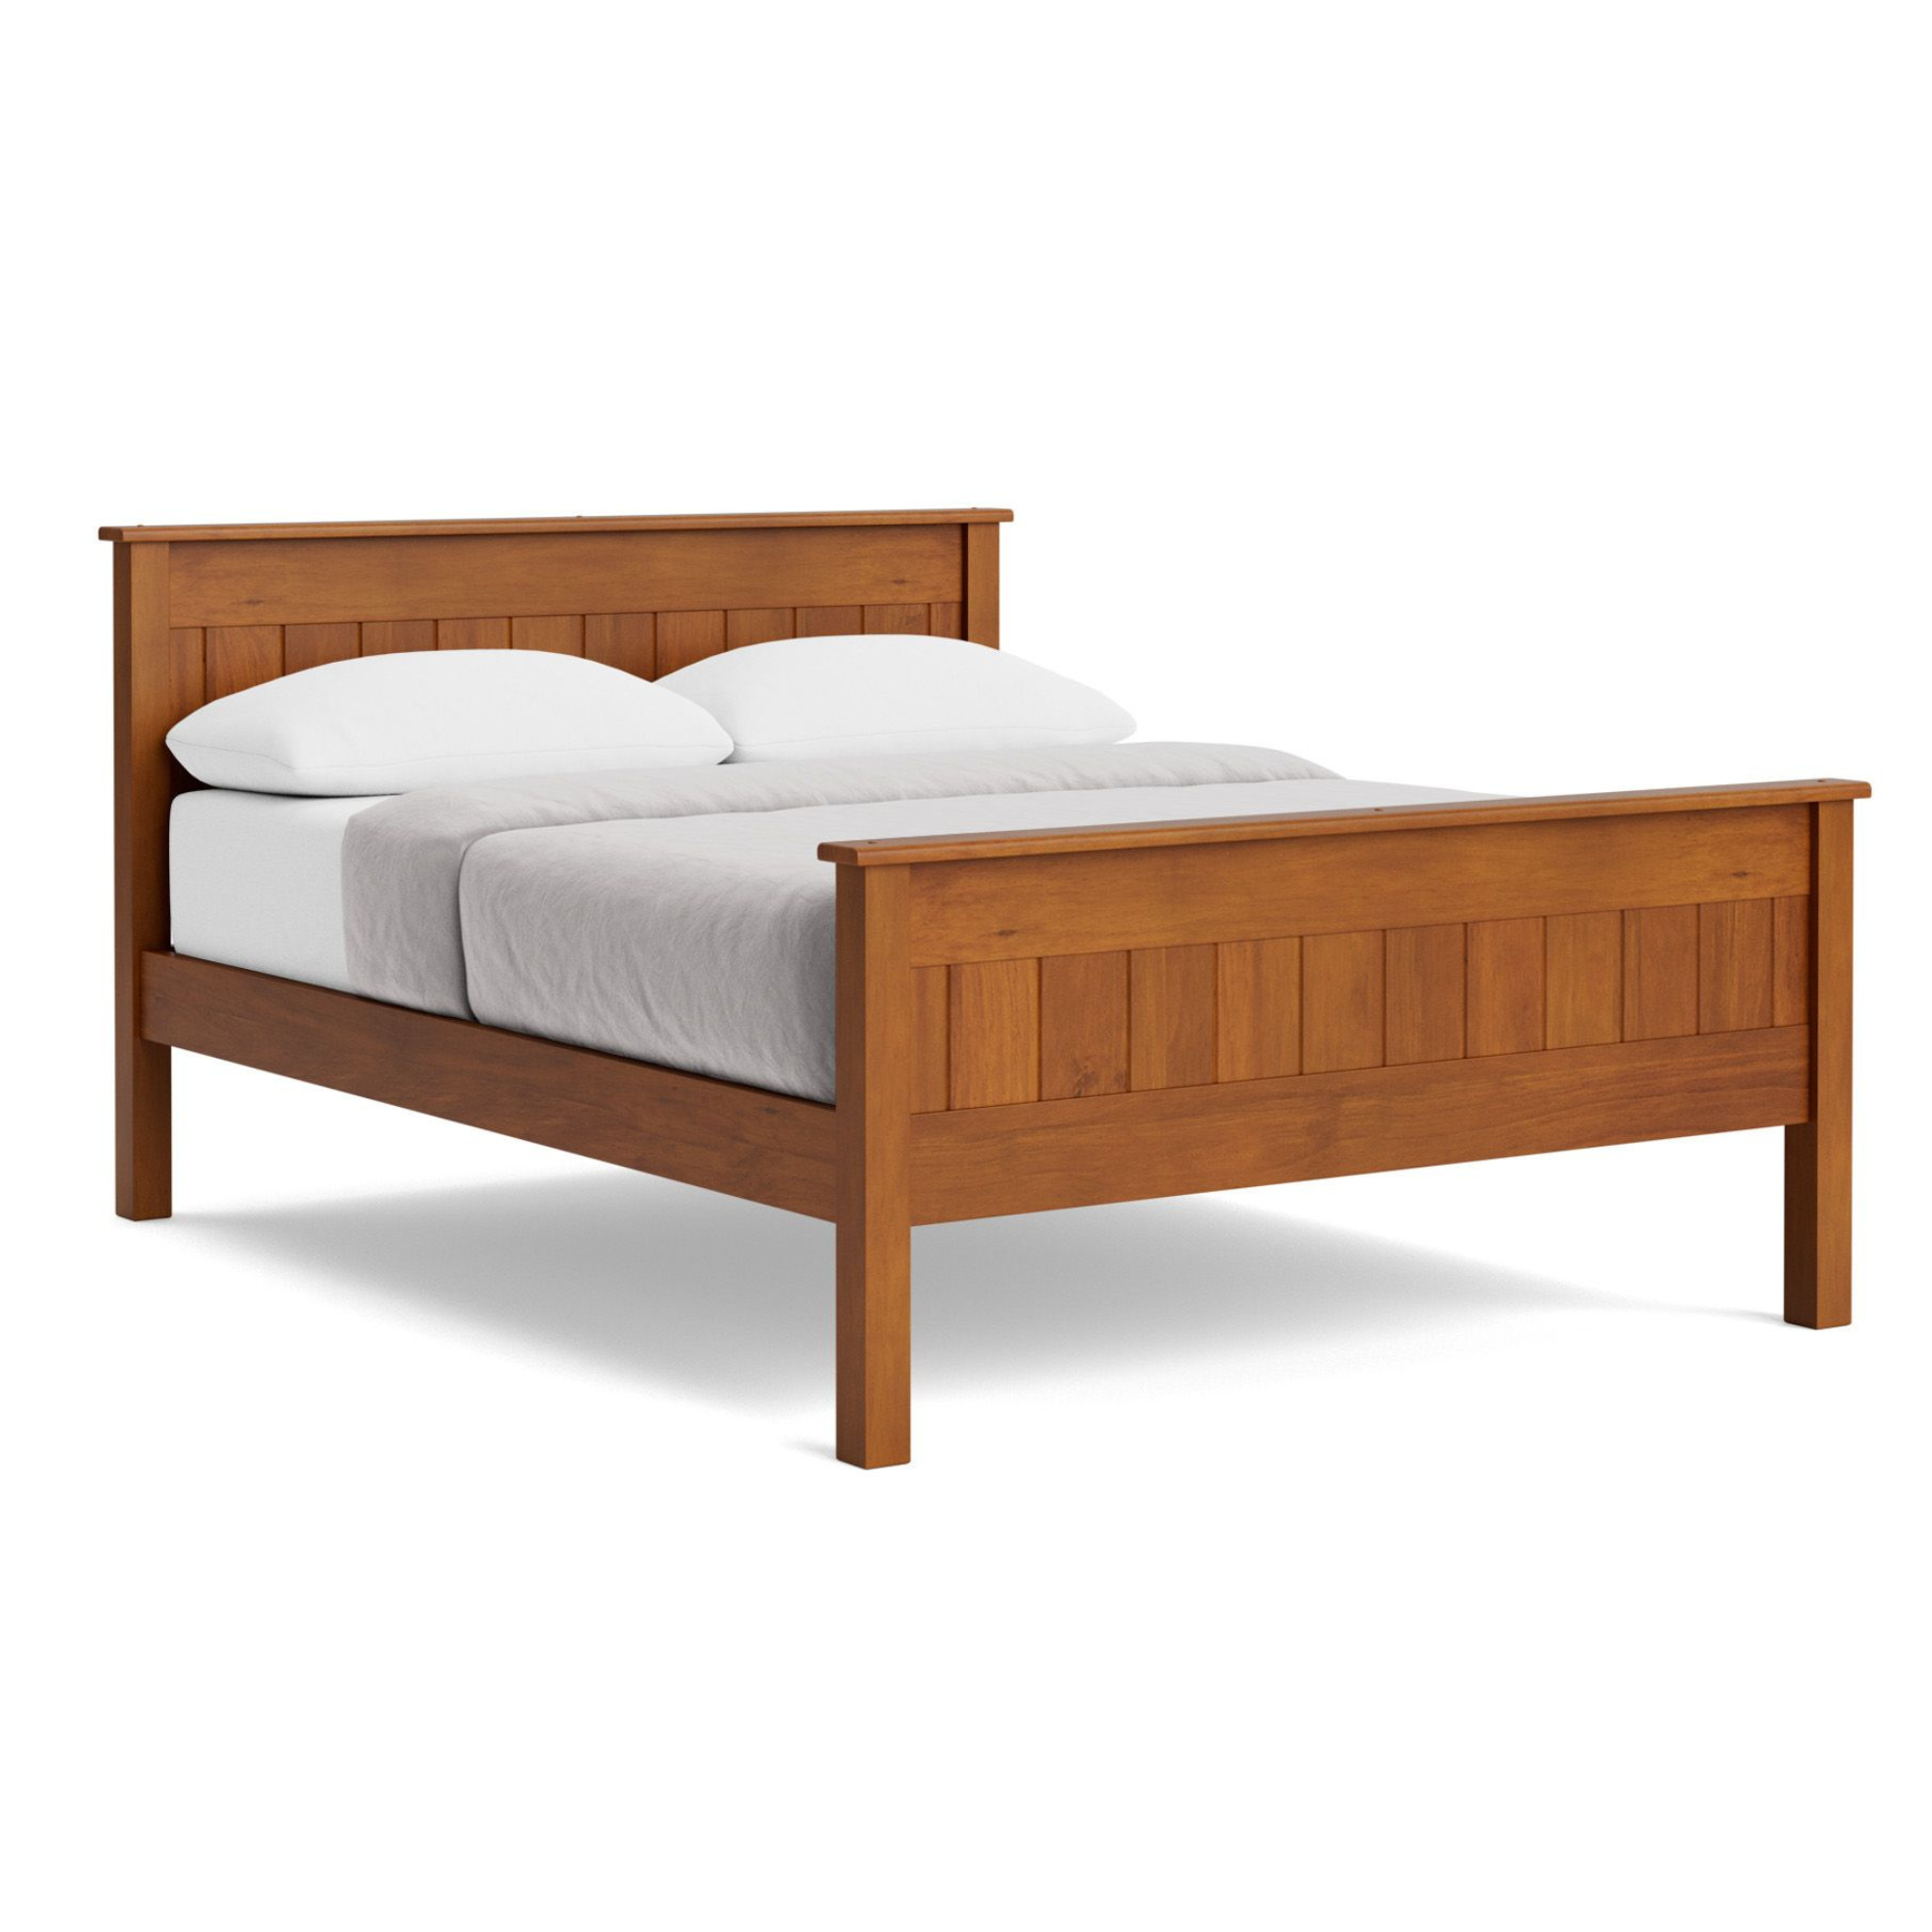 NORTHVILLE SLAT BED WITH HIGH FOOT | SLATTED OR PANELLED | NZ MADE